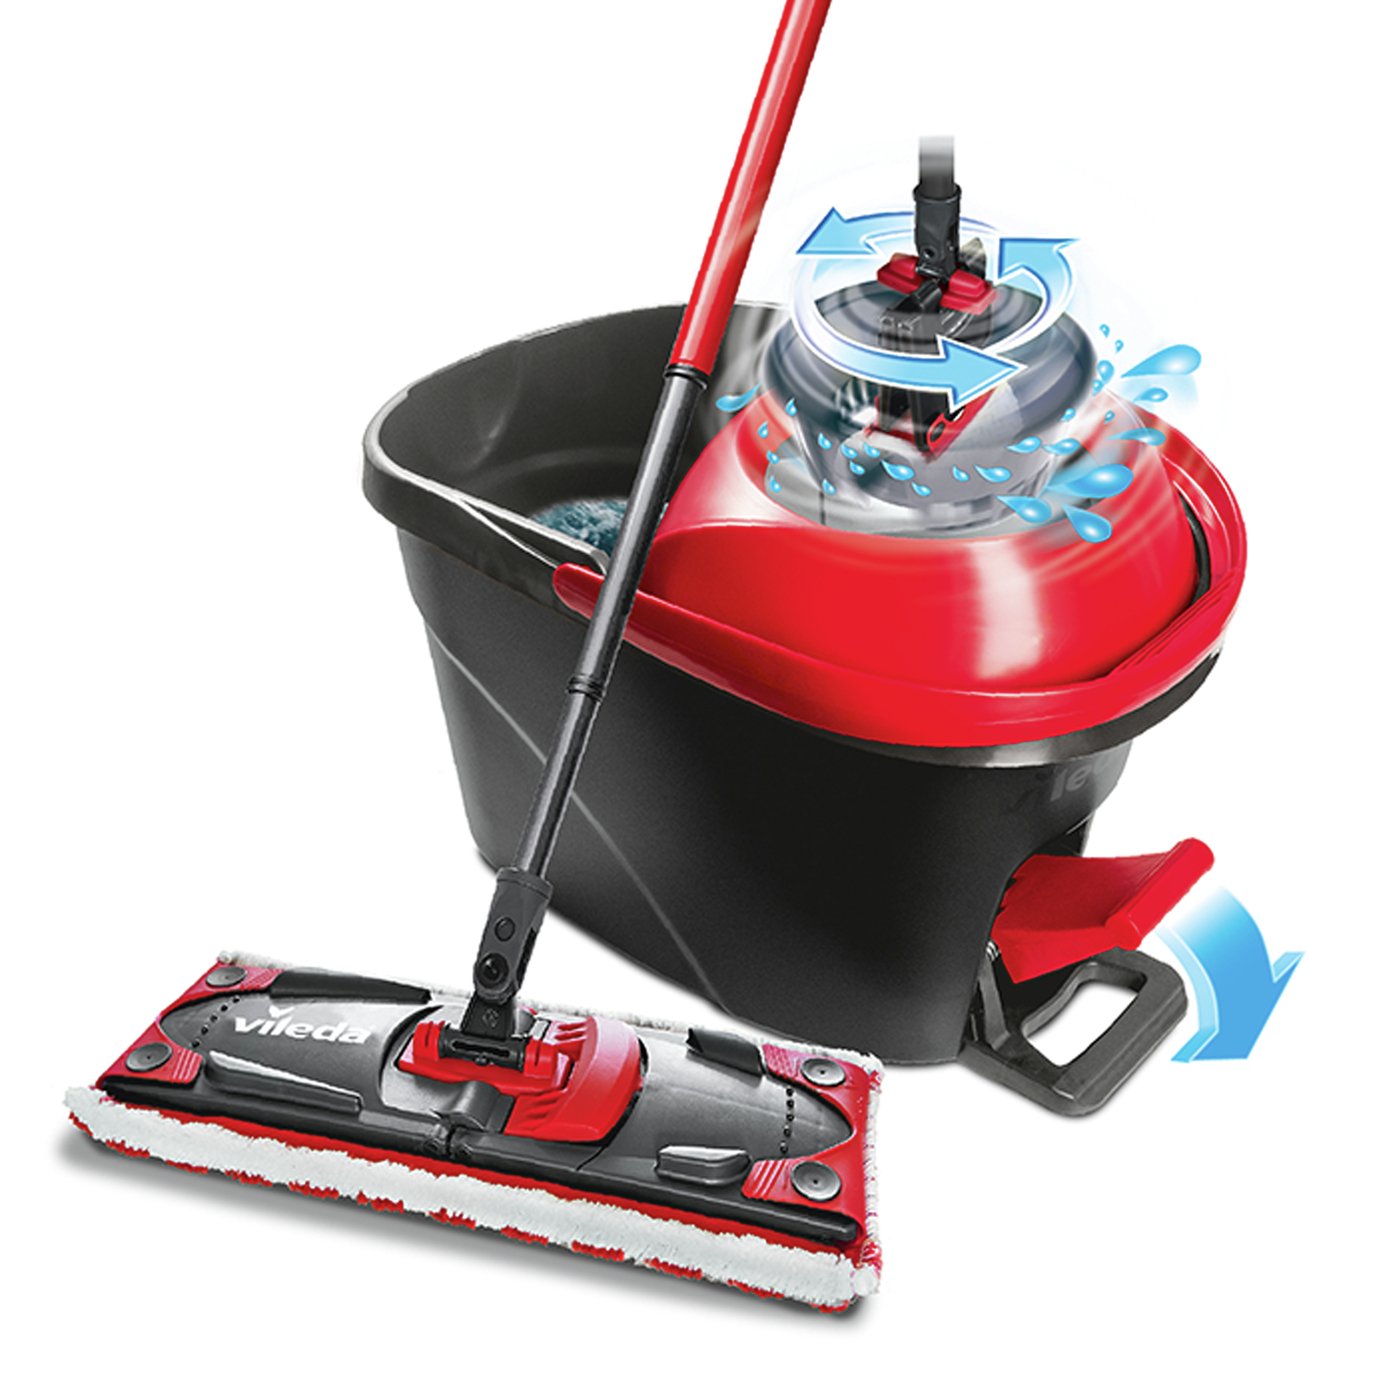 Vileda EasyWring and Clean UltraMat Mop and Bucket Set